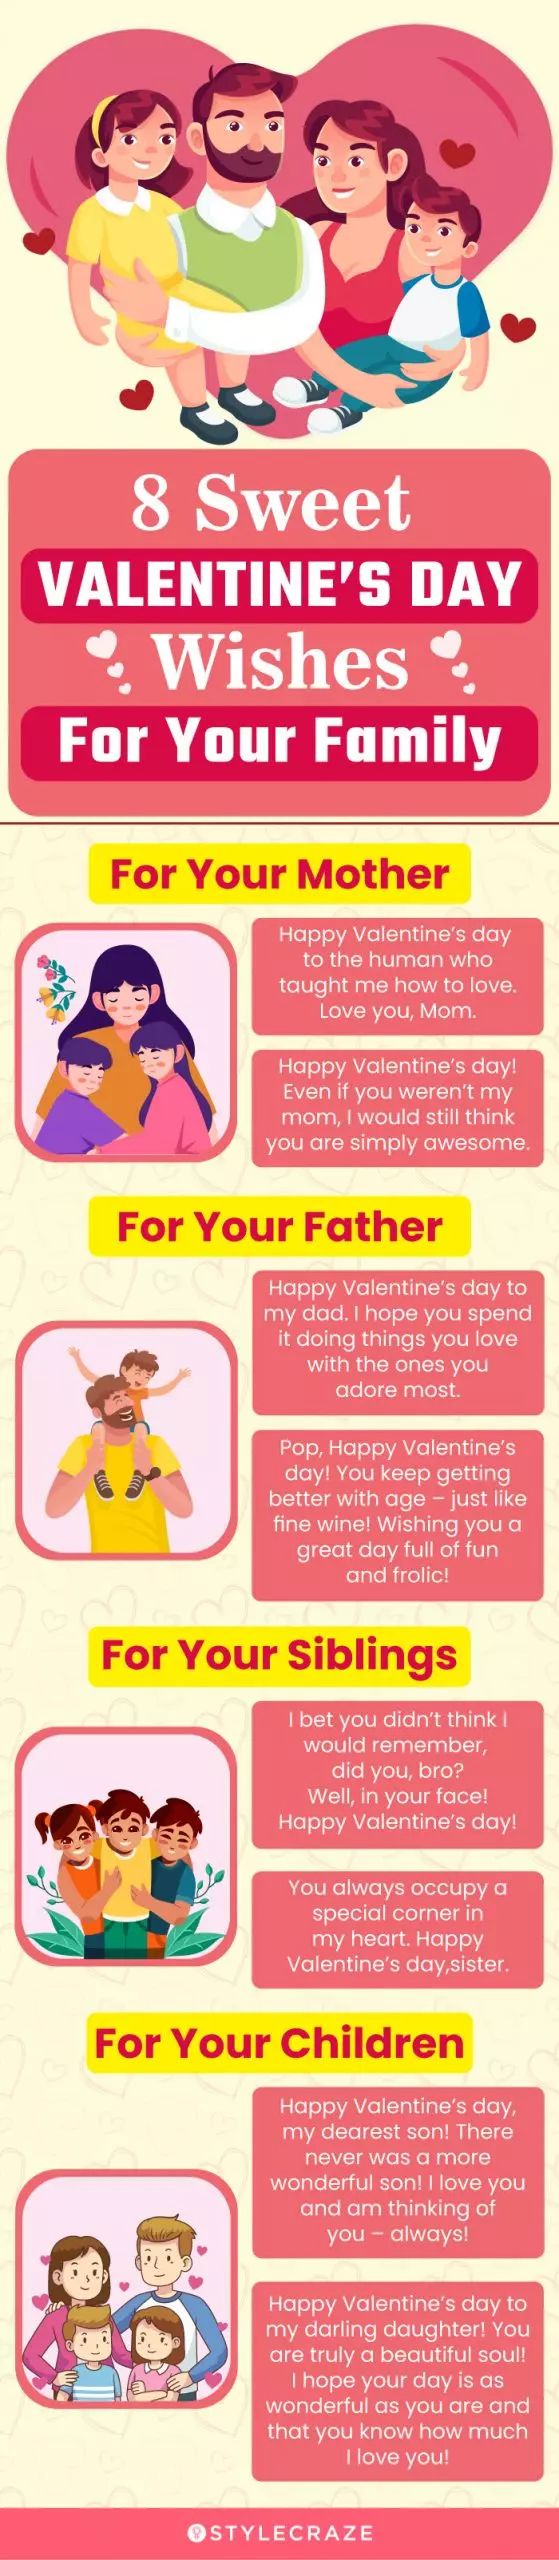 8 sweet valentine’s day wishes for your family (infographic)